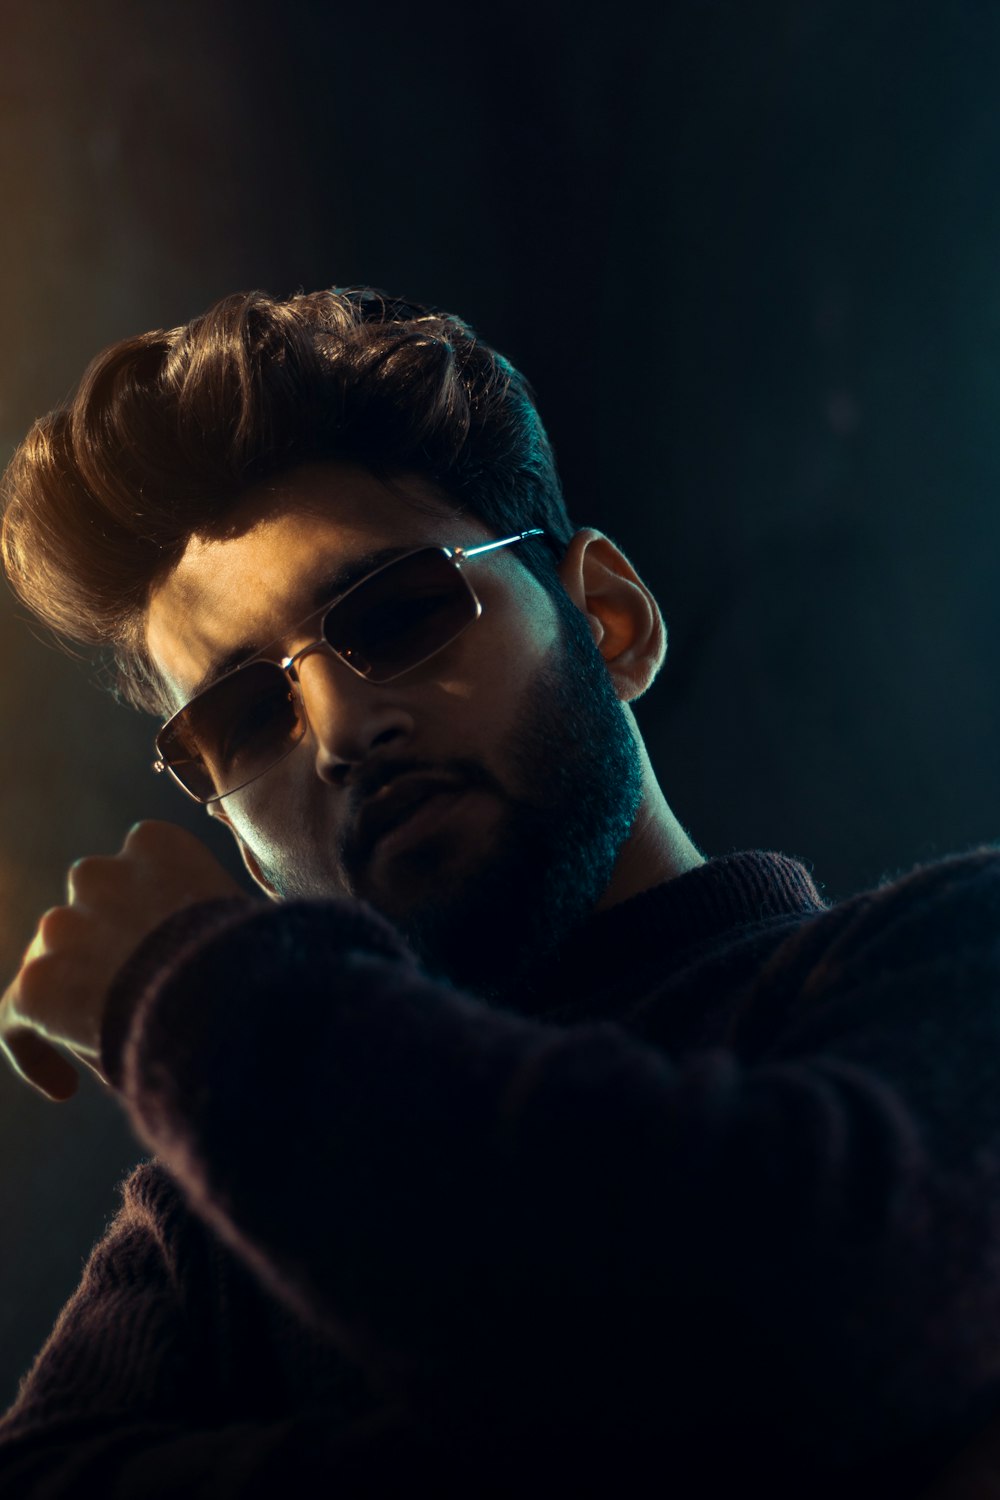 a man with a beard and sunglasses holding a cigarette